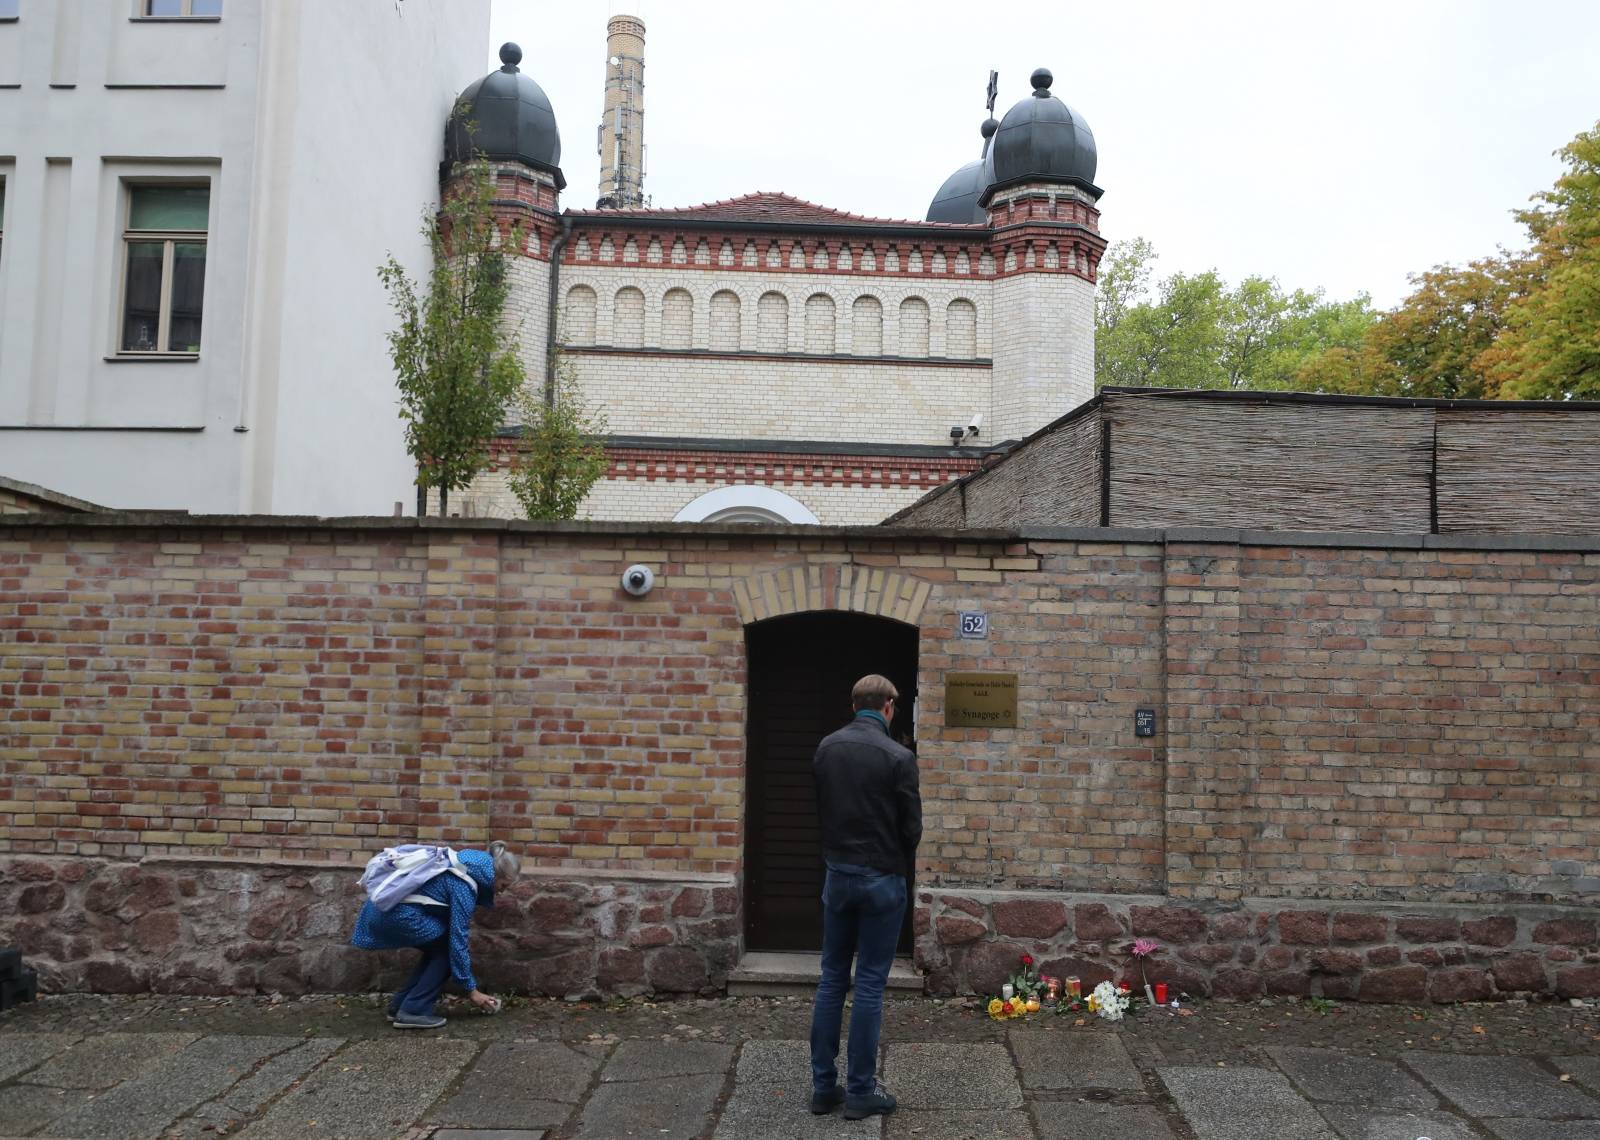 After attack in Halle/Saale - Synagogue